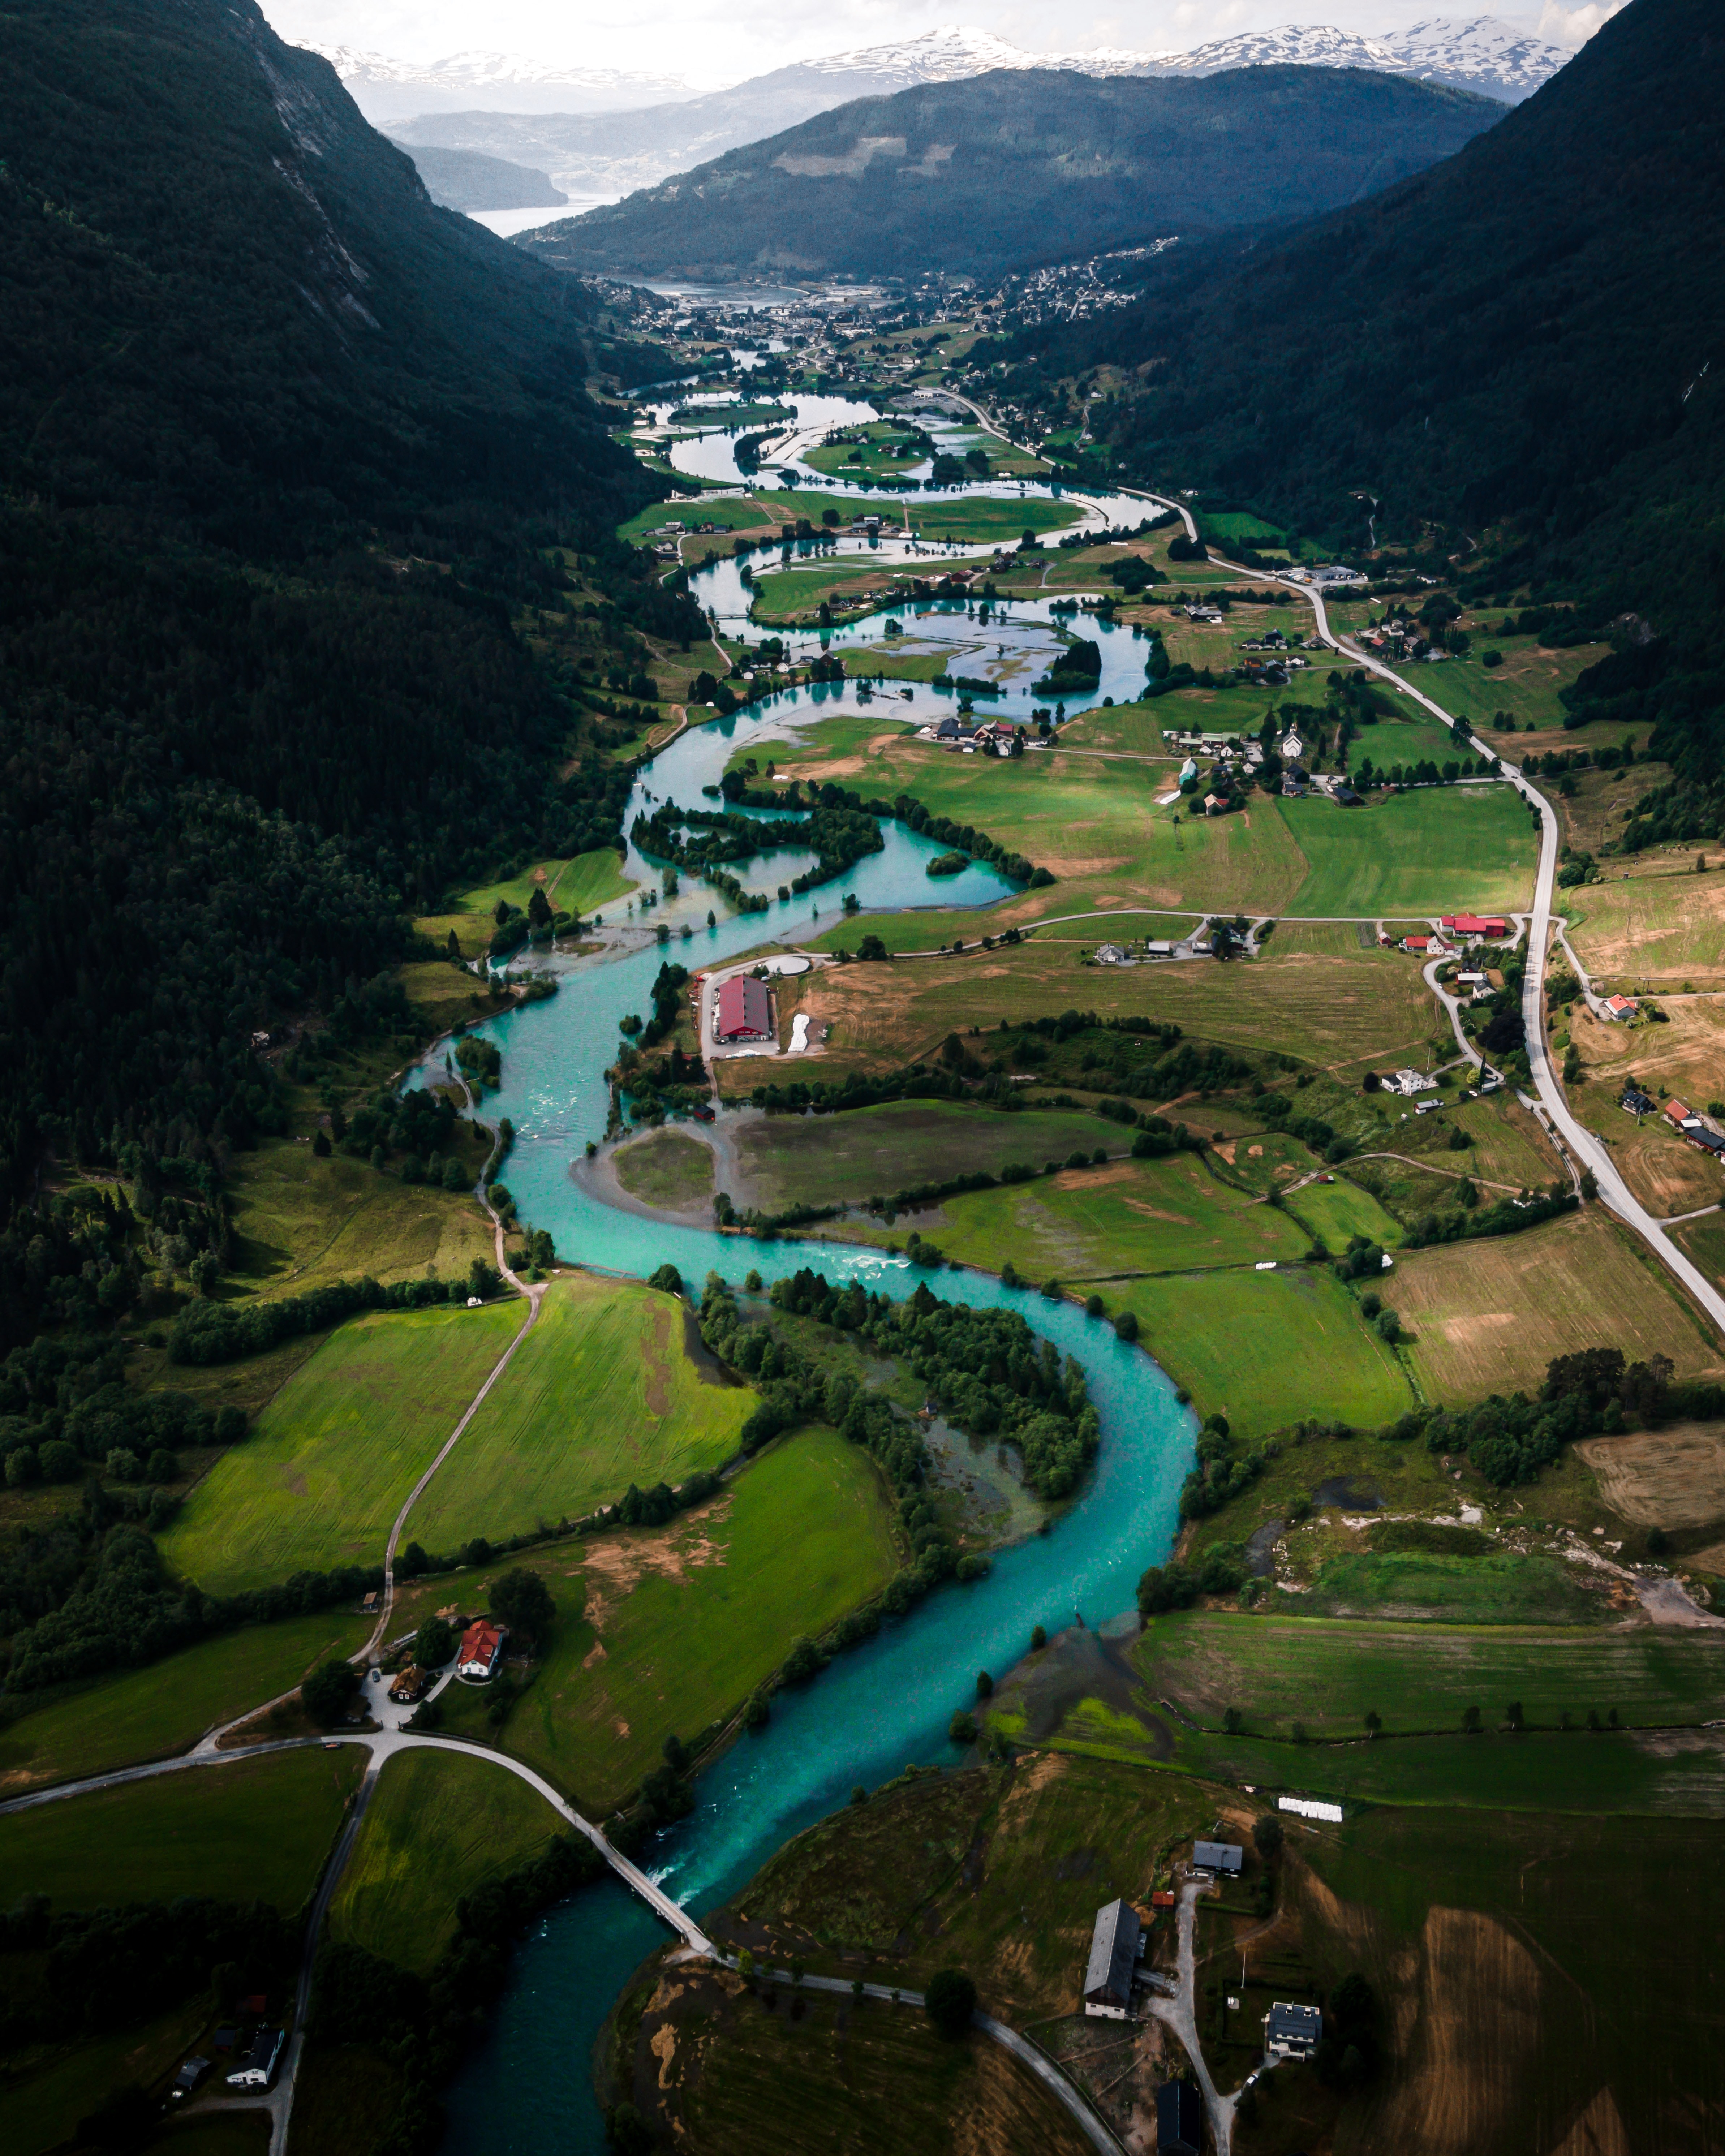 android rivers, winding, nature, building, sinuous, mountains, village